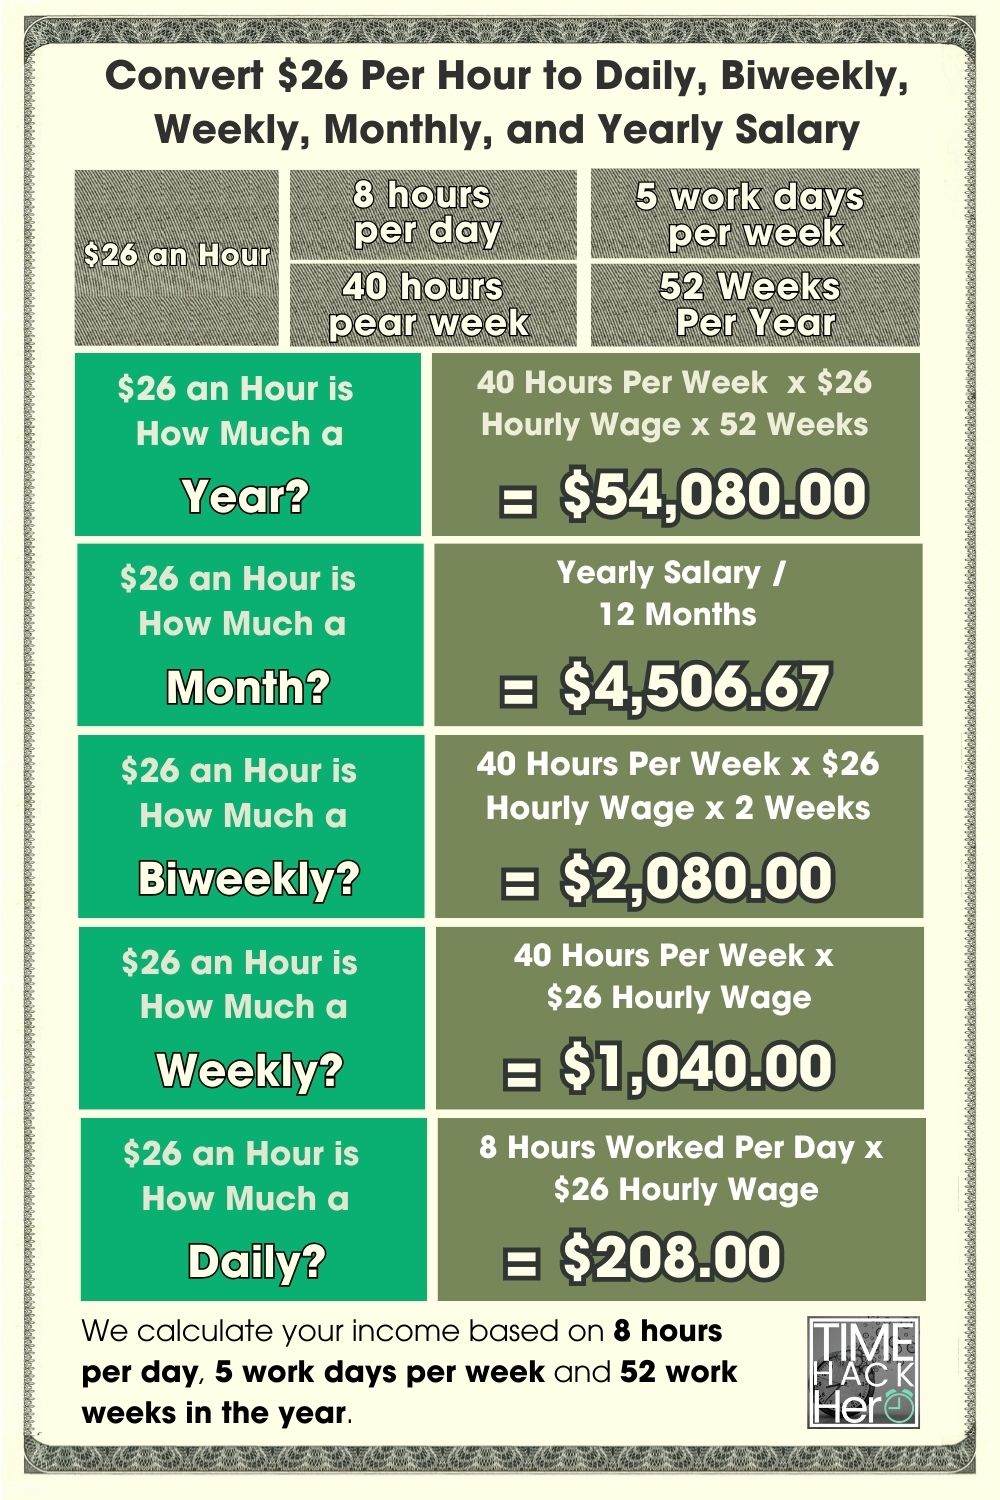 Convert $26 Per Hour to Daily, Biweekly, Weekly, Monthly, and Yearly Salary